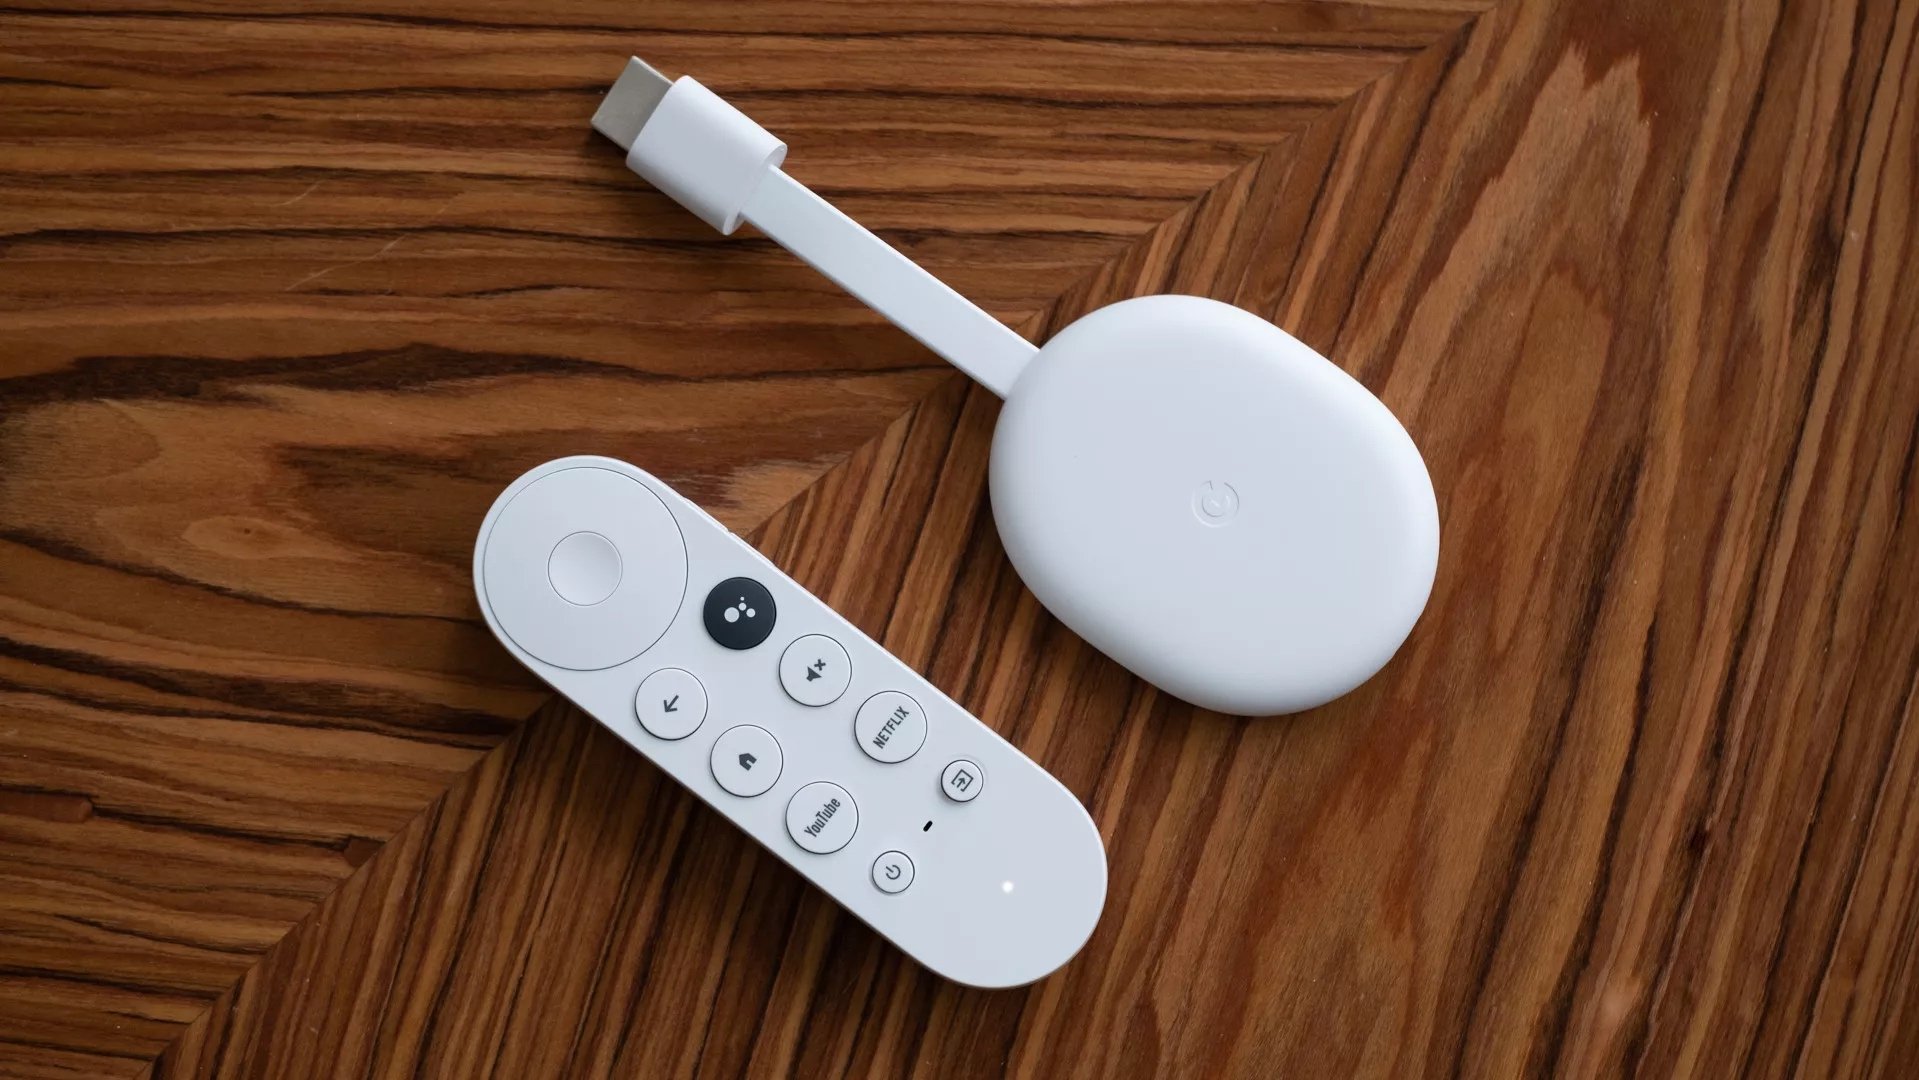 Google's new Chromecast costs $30 — and it has a remote